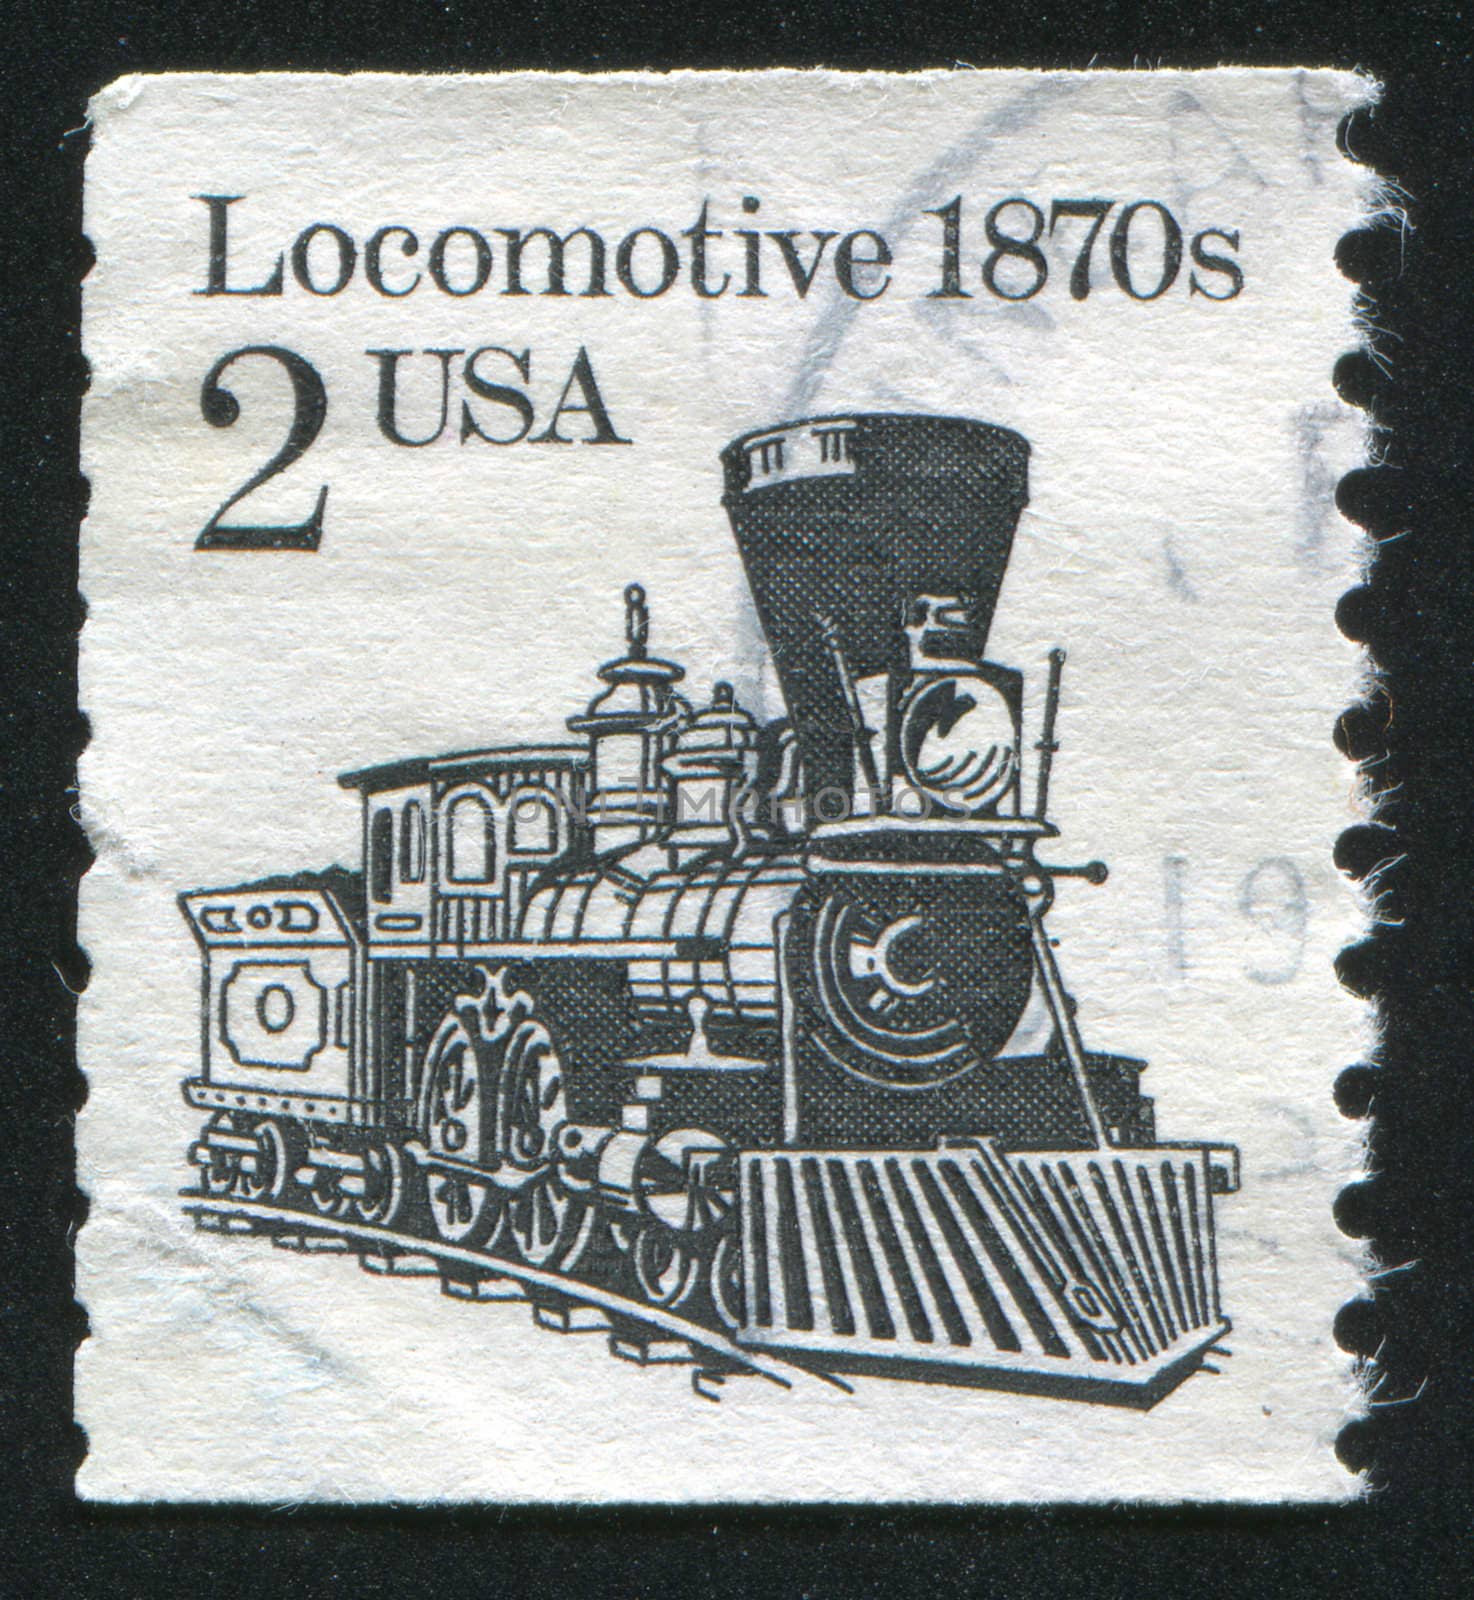 locomotive by rook